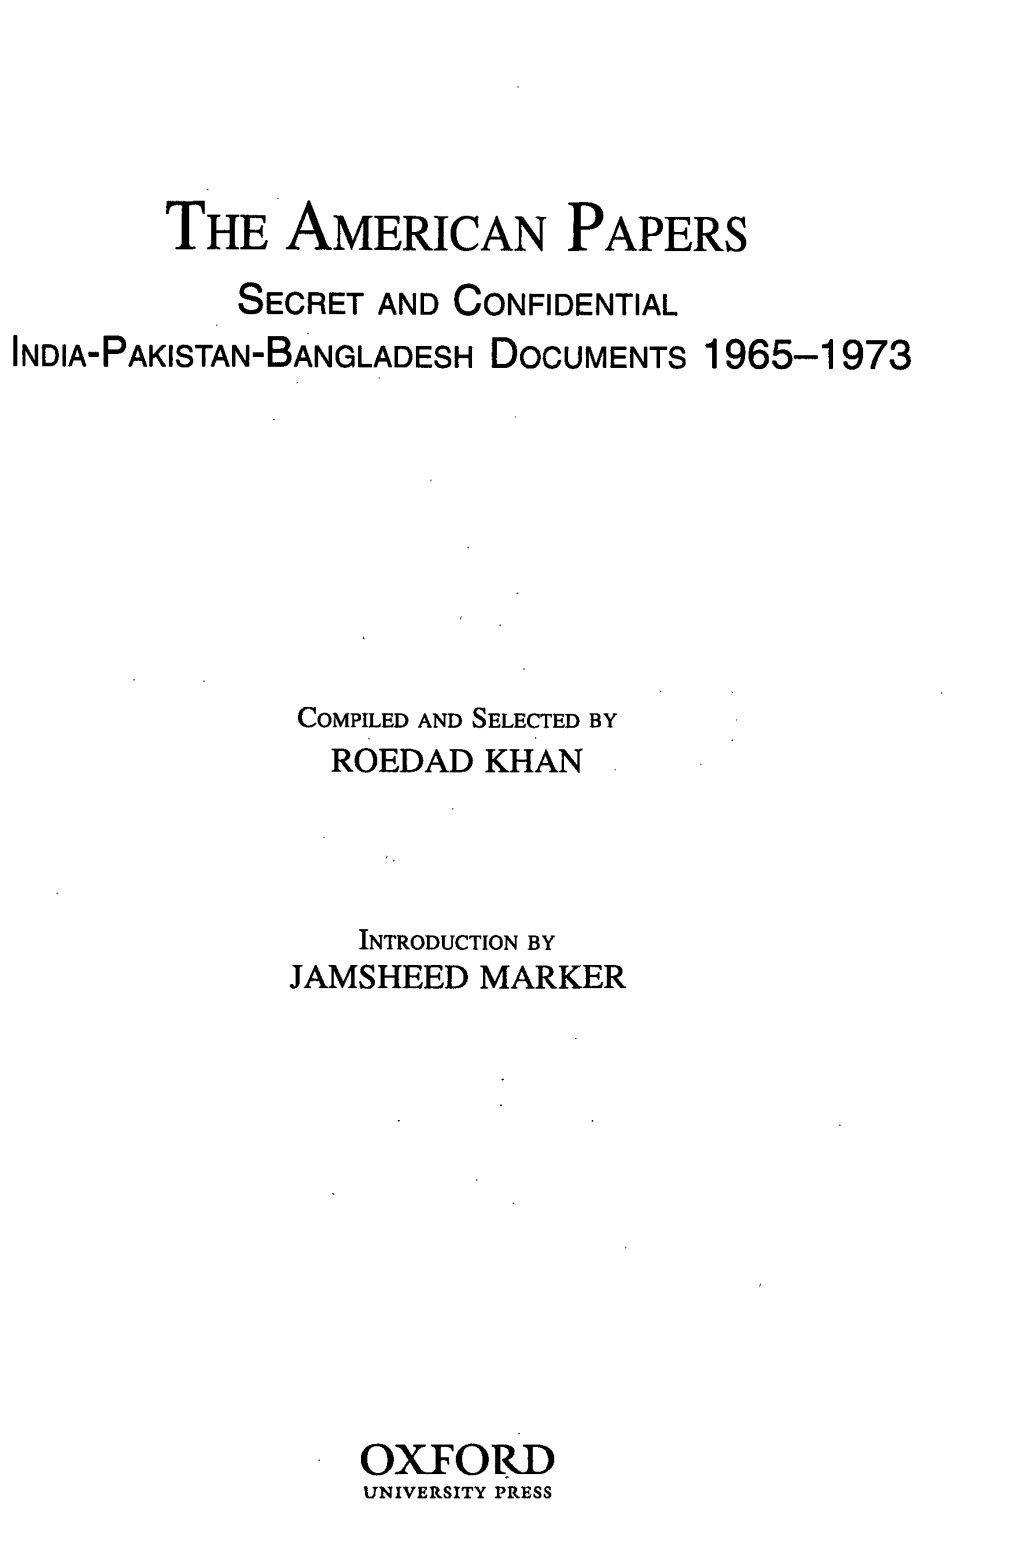 The American Papers Secret and Confidential India-Pakistan-Bangladesh Documents 1965-1973